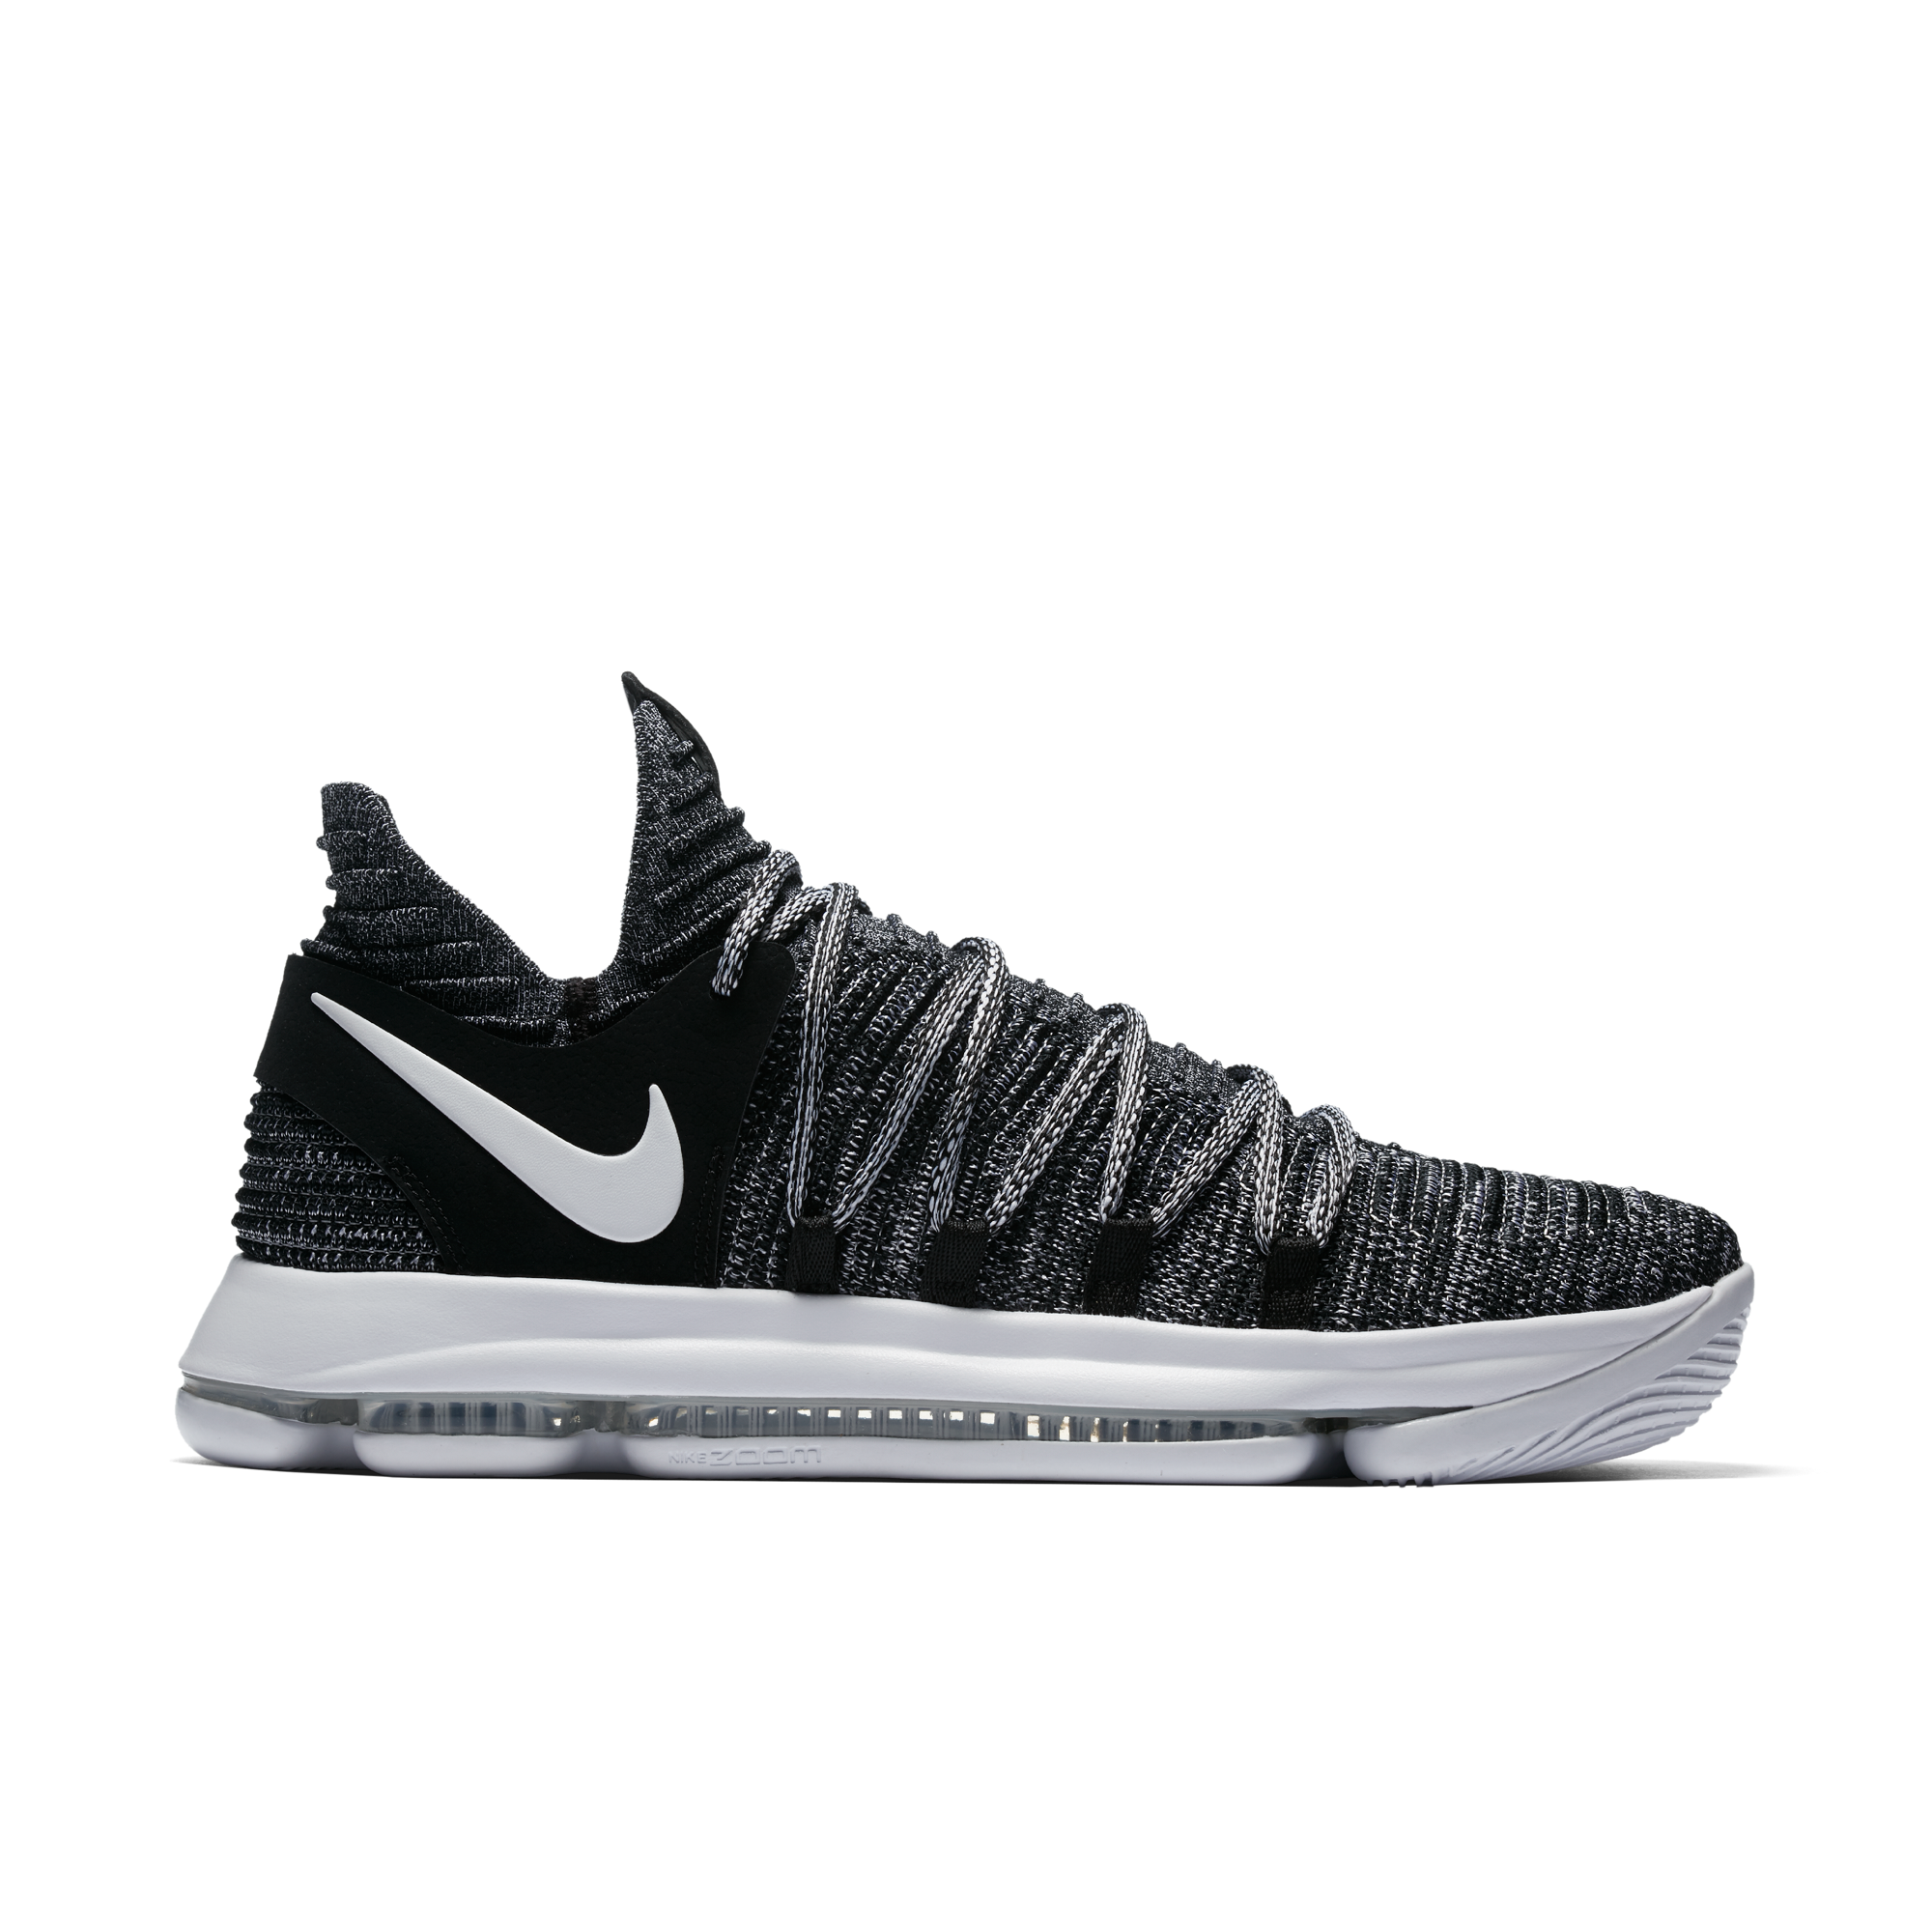 kd x black and white